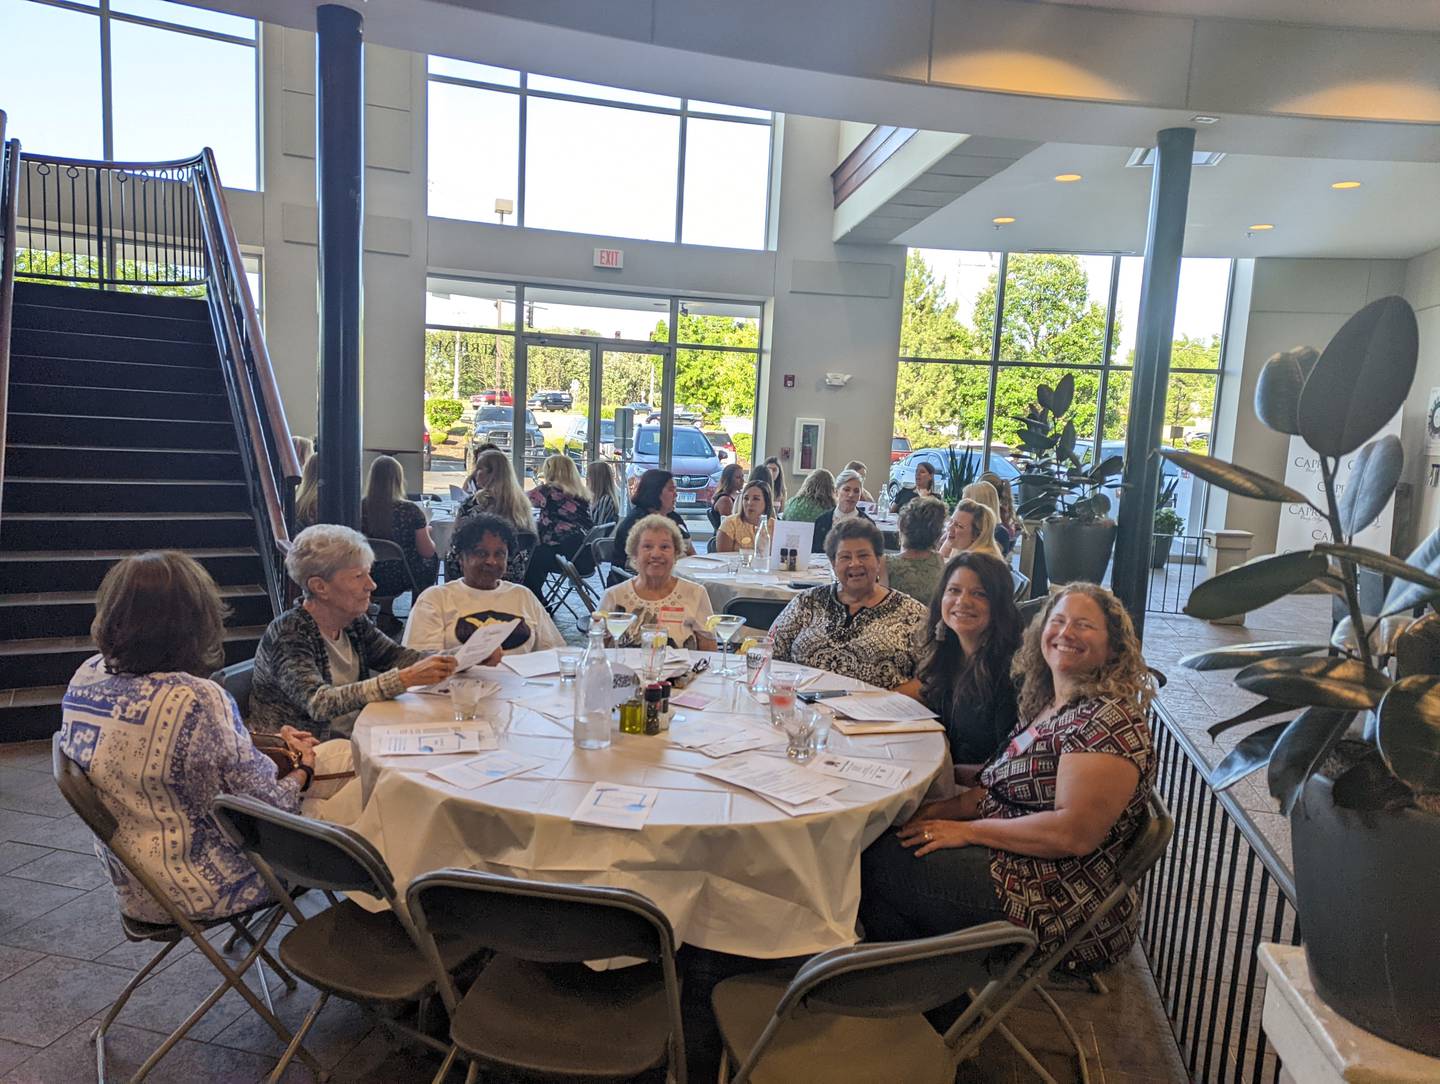 The Lincoln-way Area Business Women's Organization hosted a celebration dinner on Tuesday, June 21, 2022, at Gatto's in New Lenox to honor the recipients of the 2022 scholarships. Each young woman was awarded a $1,000 scholarship. Ninety people attended the celebration.